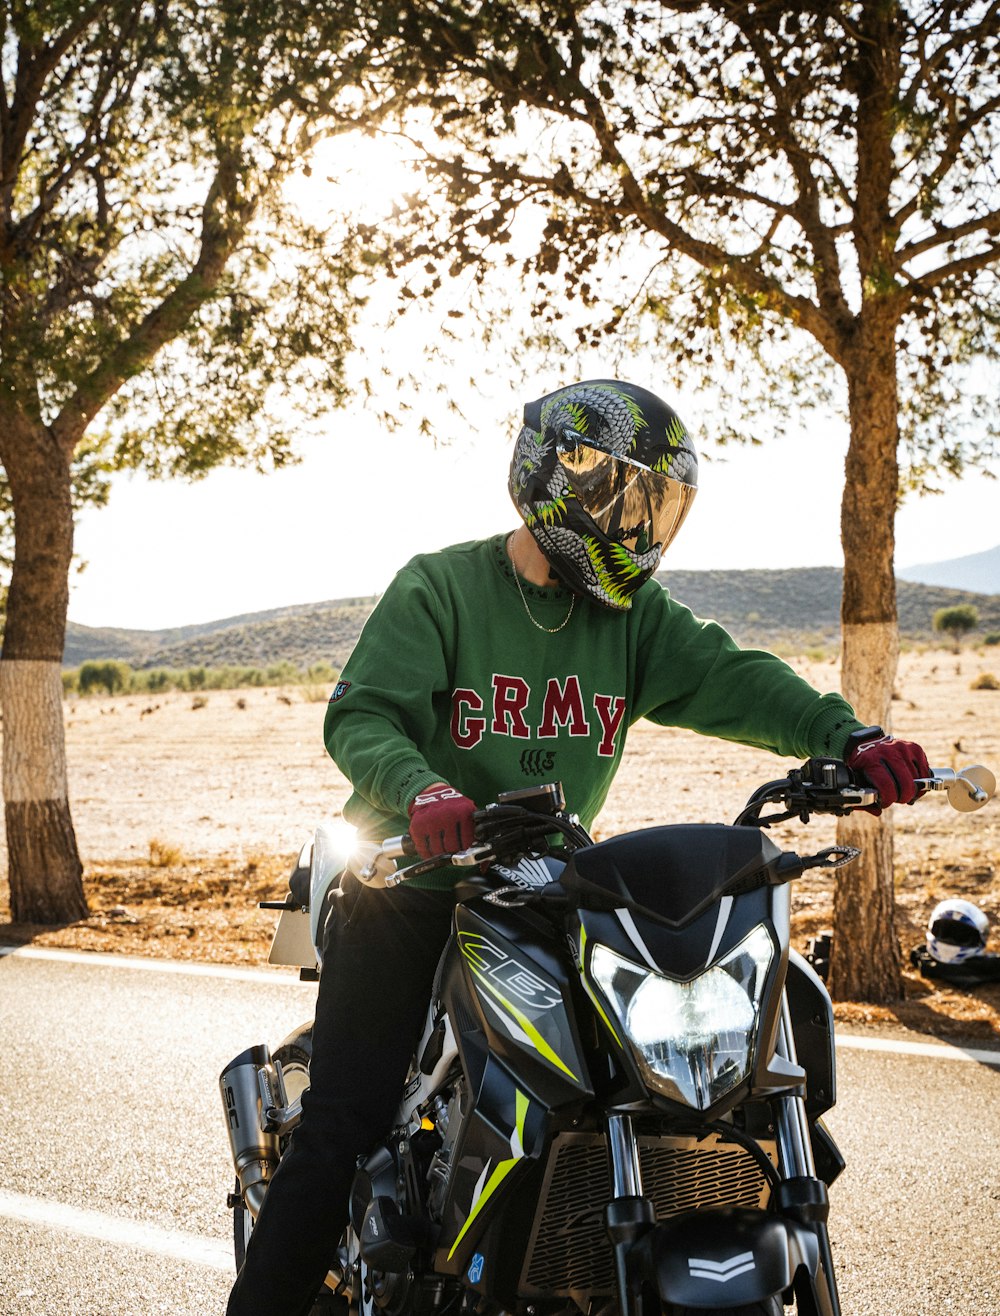 a man in a green shirt is riding a motorcycle